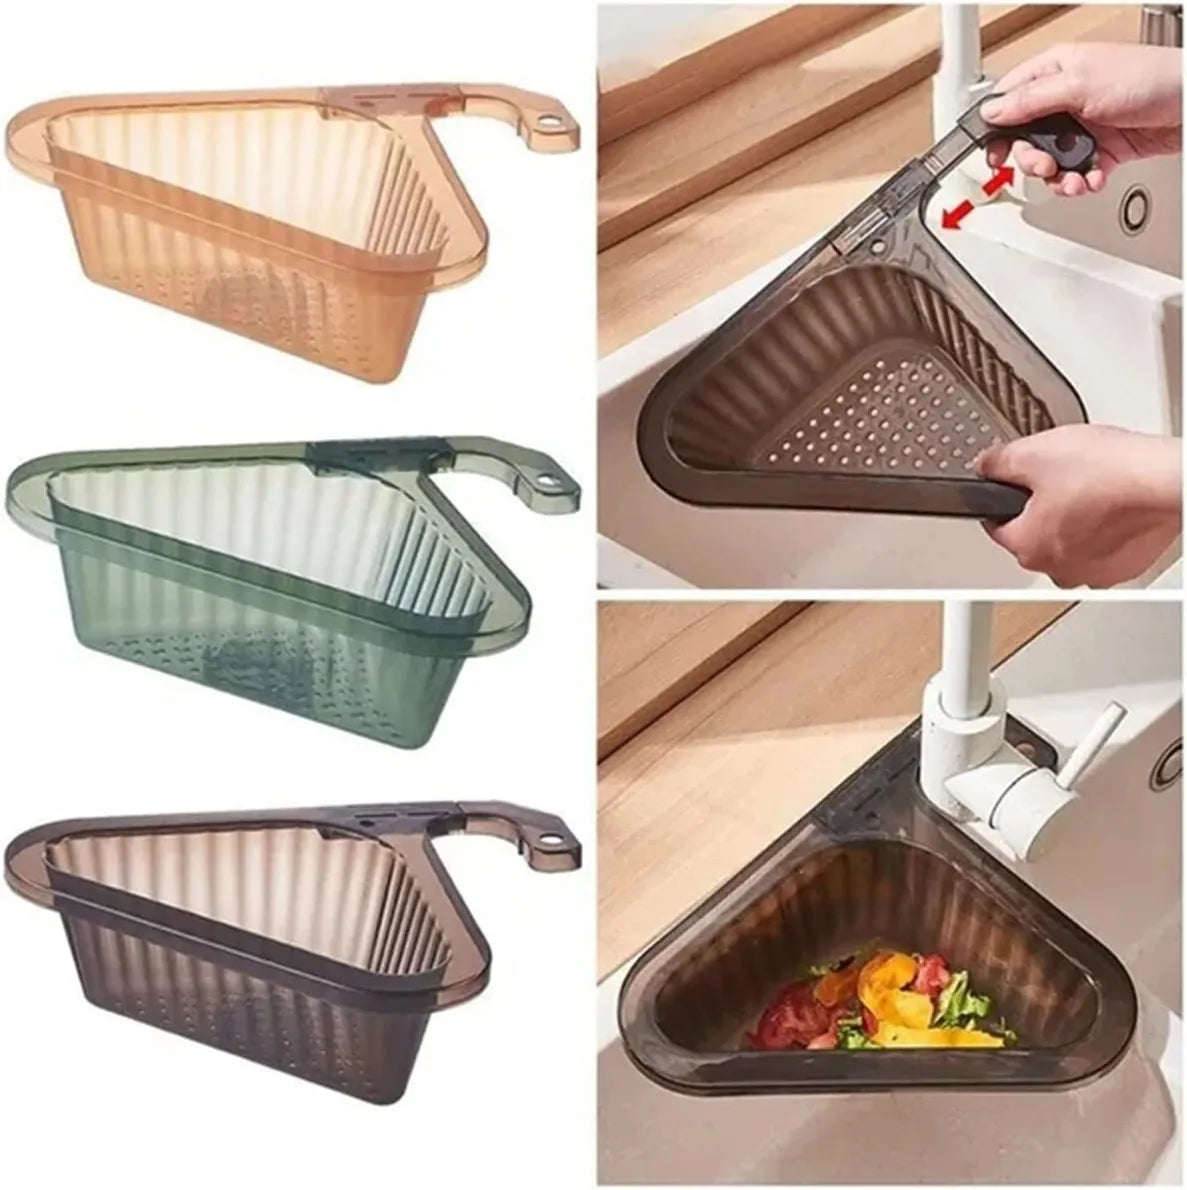 Different colors of Telescopic Sink Drain Basket